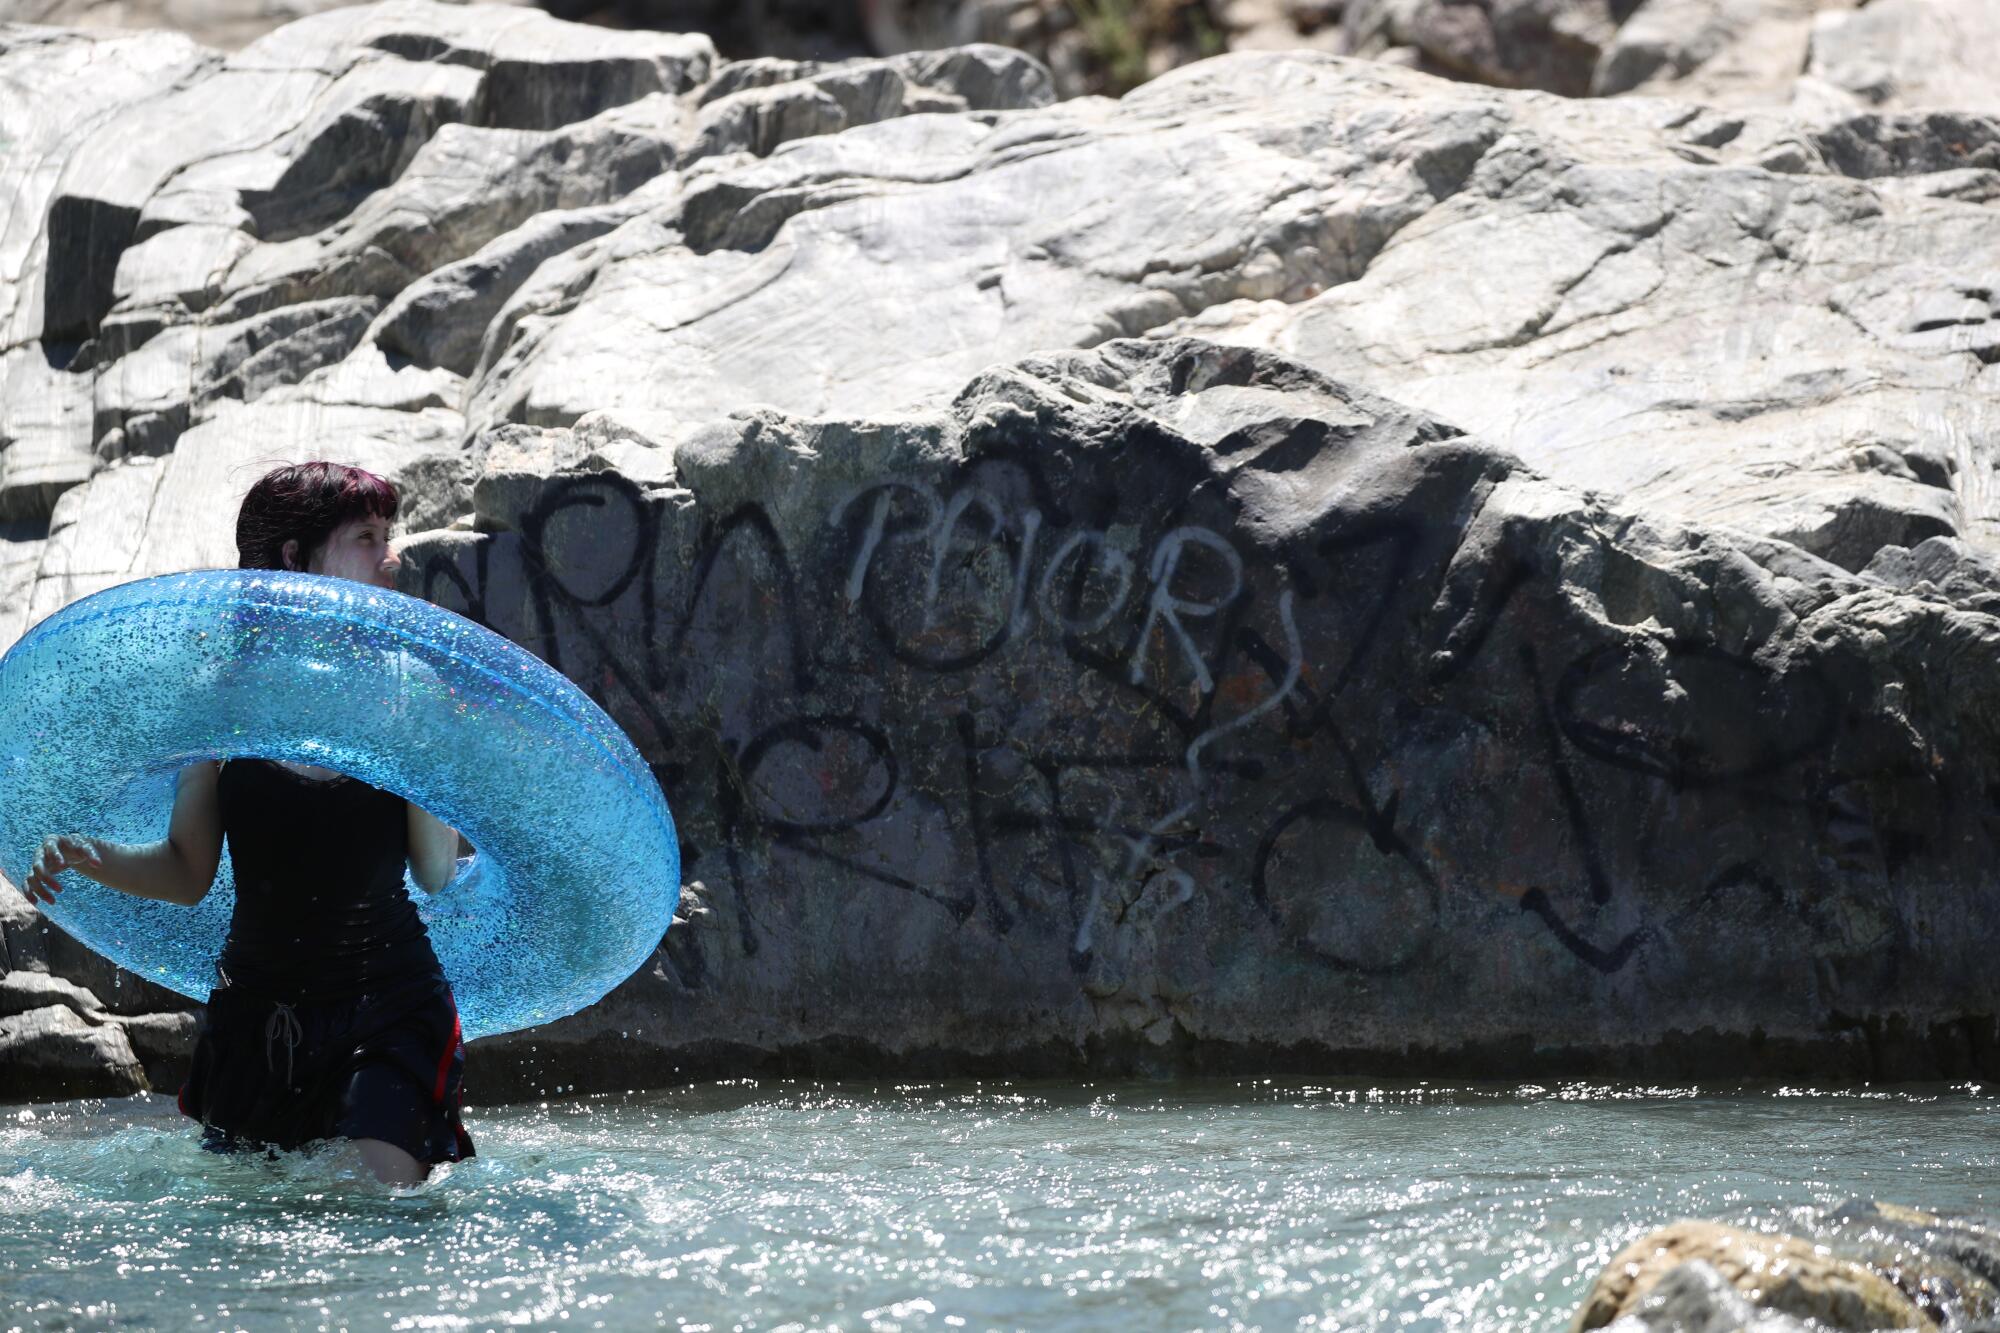 A woman standing in a river holds a blue innertube while graffiti covers rocks in the background. 